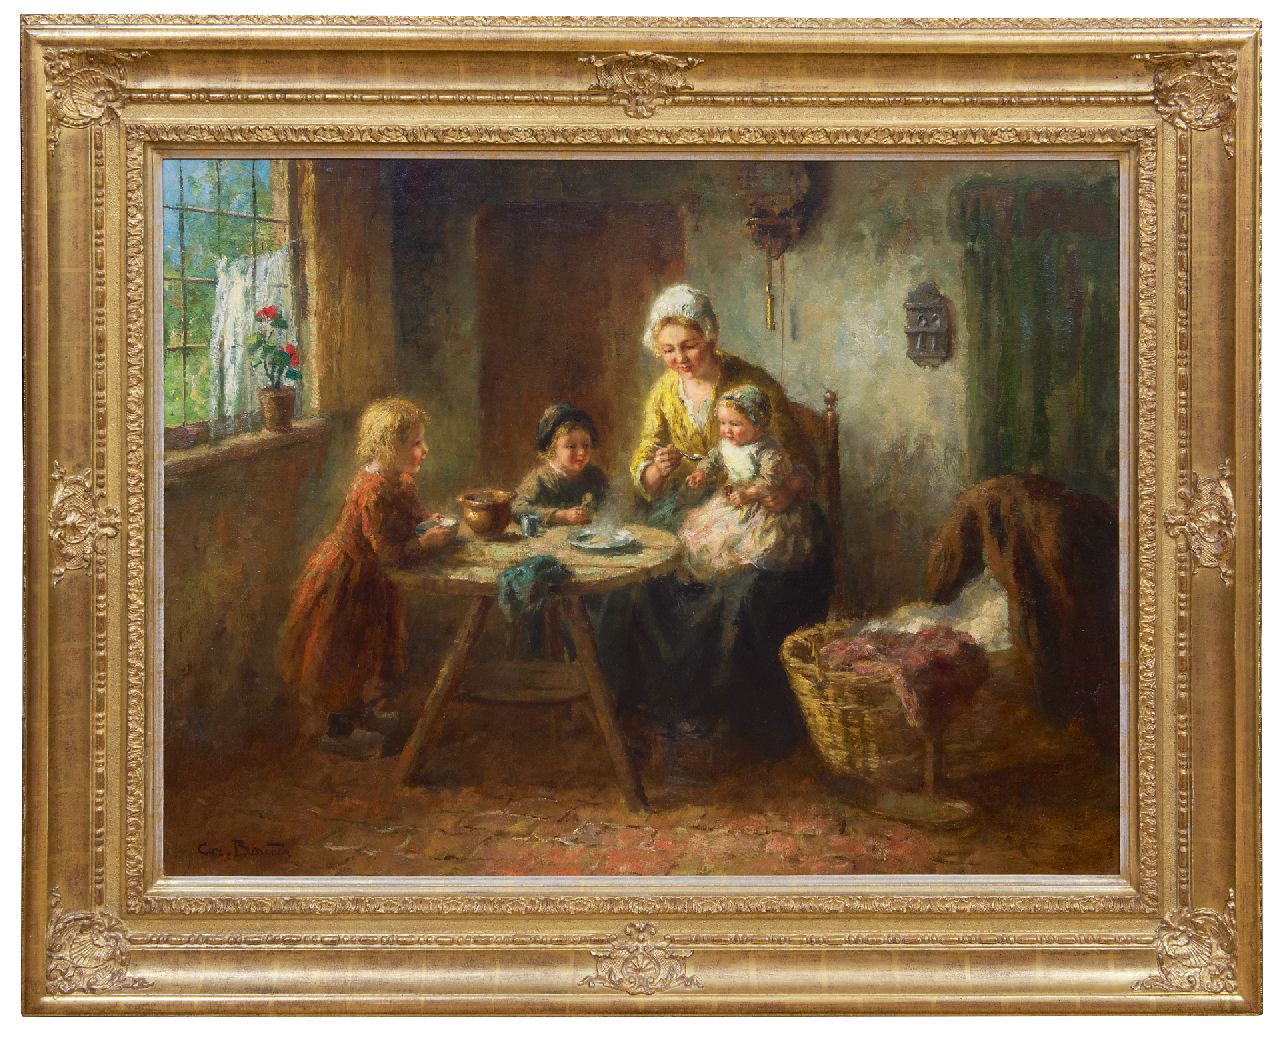 Bouter C.W.  | Cornelis Wouter 'Cor' Bouter, Interior with mother and children at mealtime, oil on canvas 75.1 x 99.9 cm, signed l.l.